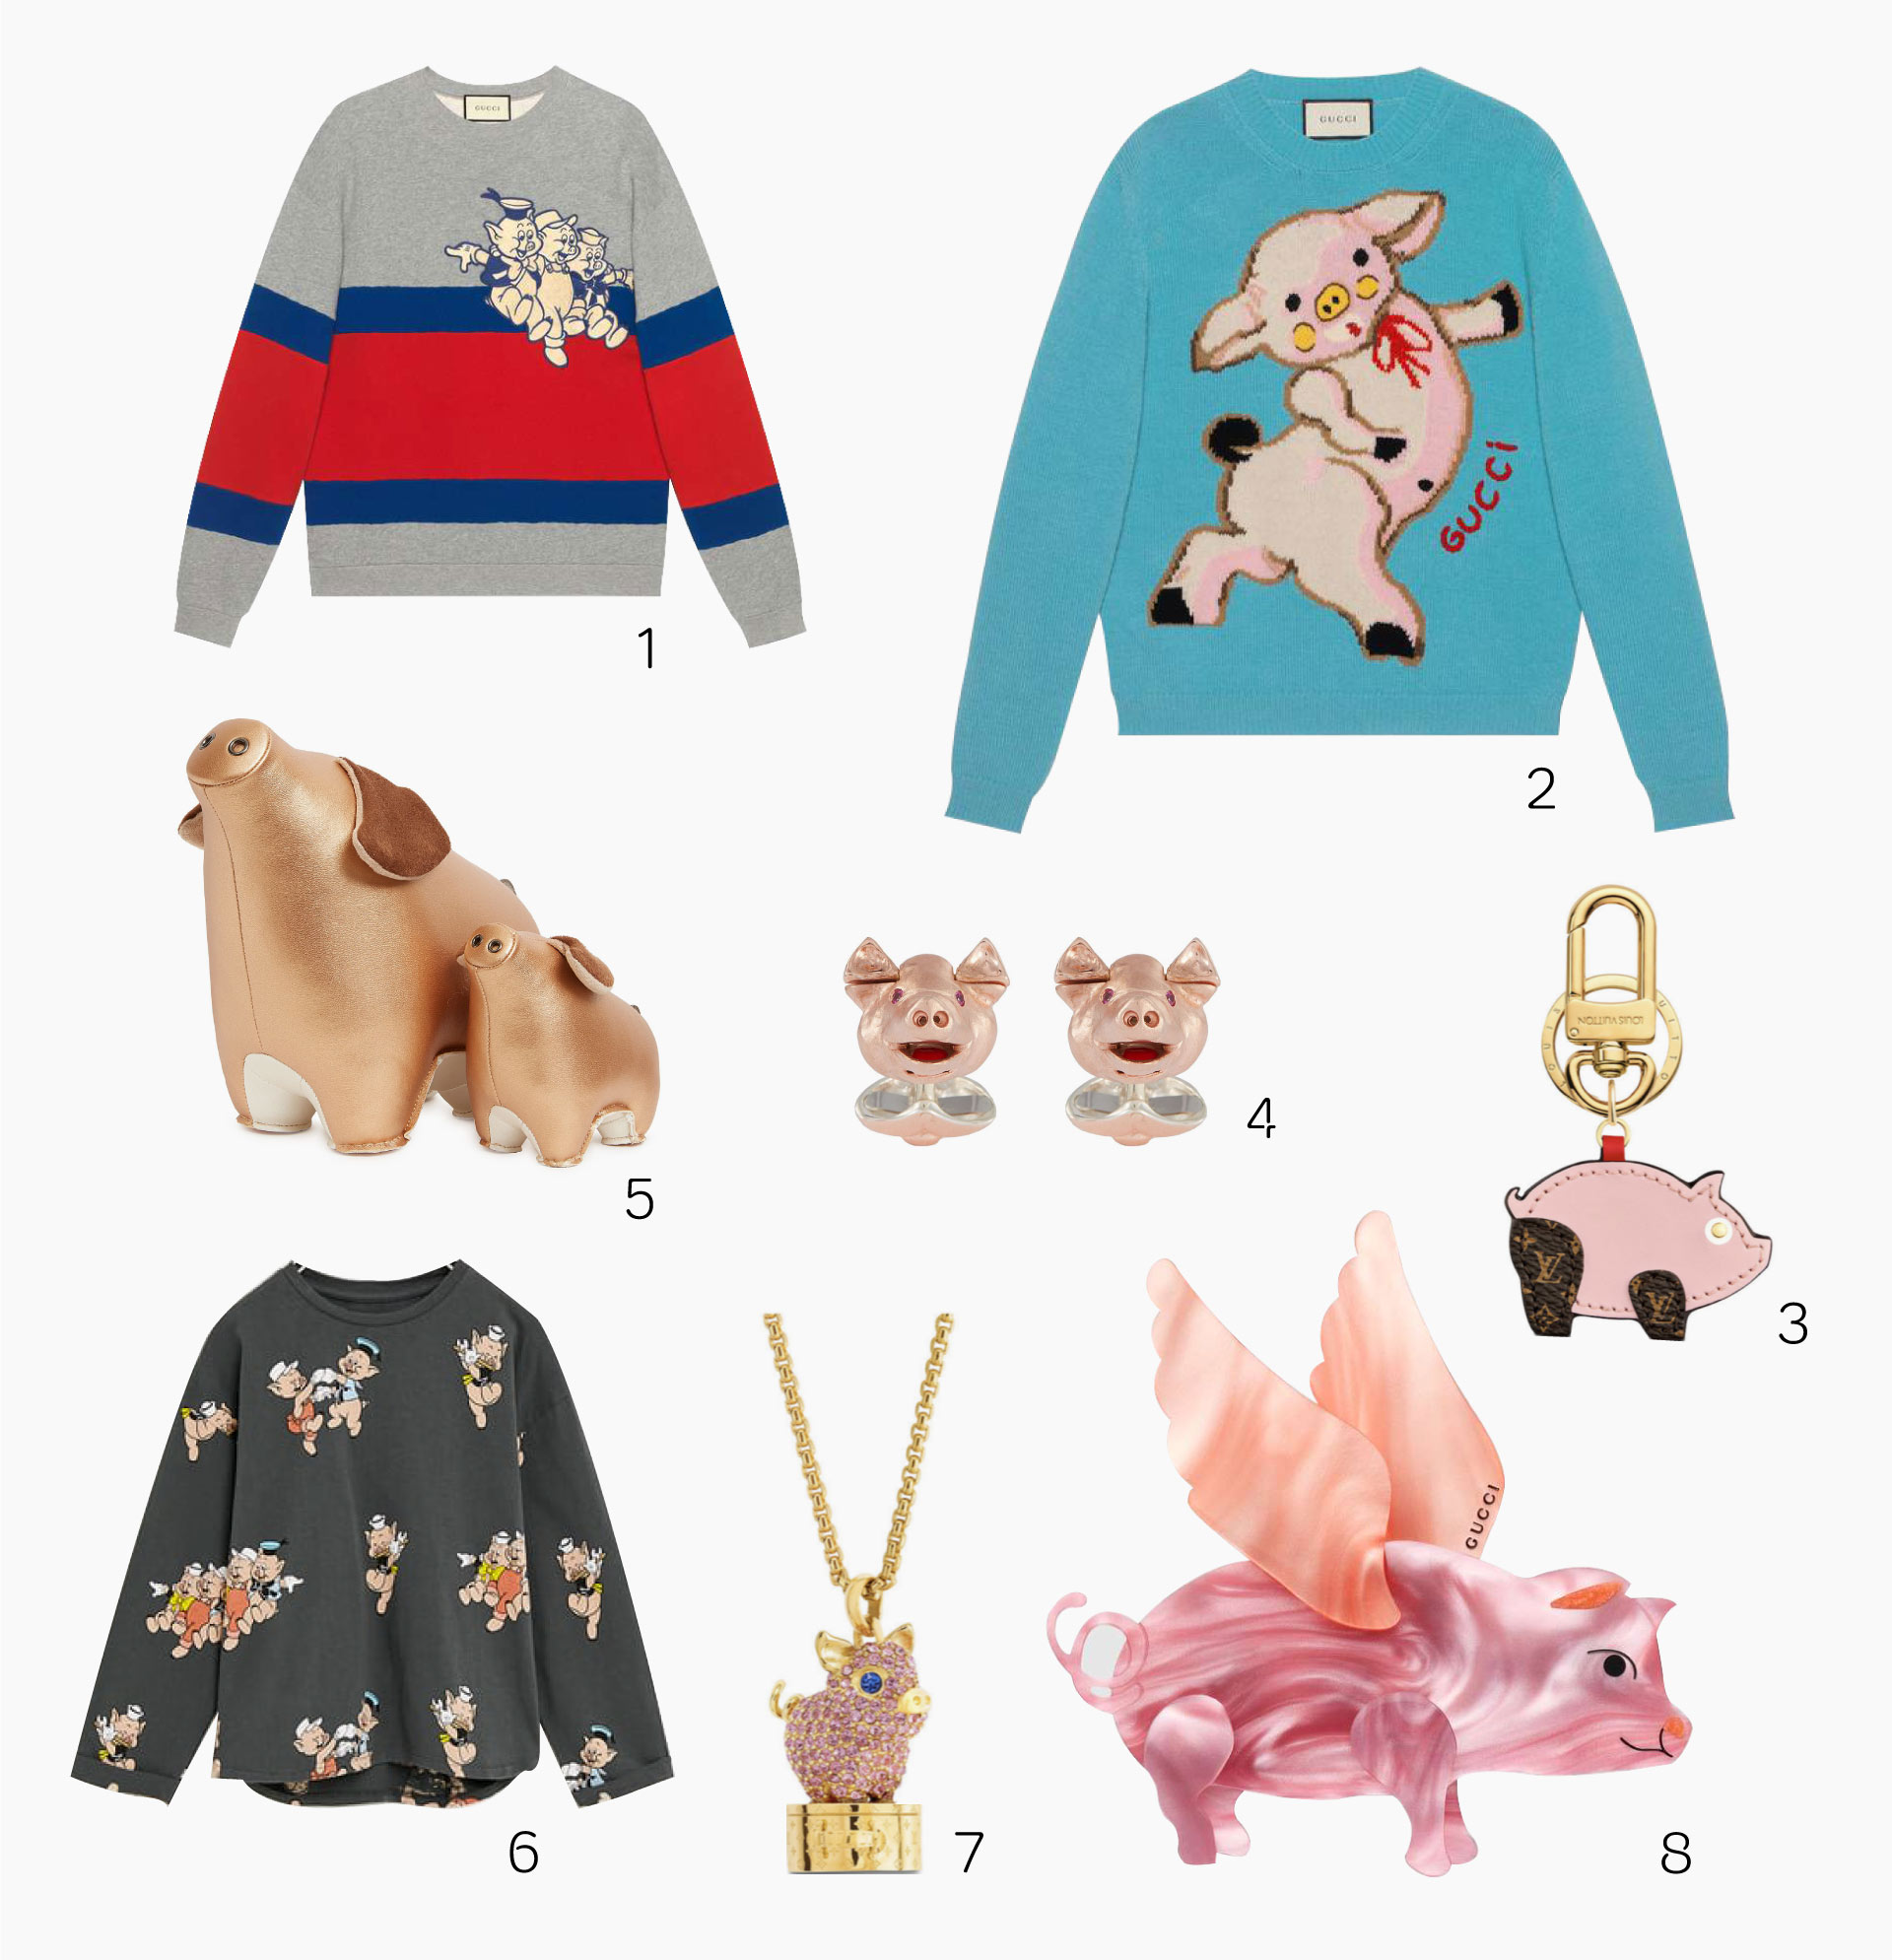 The best Year of the Pig-inspired fashion pieces currently available at Pacific Place